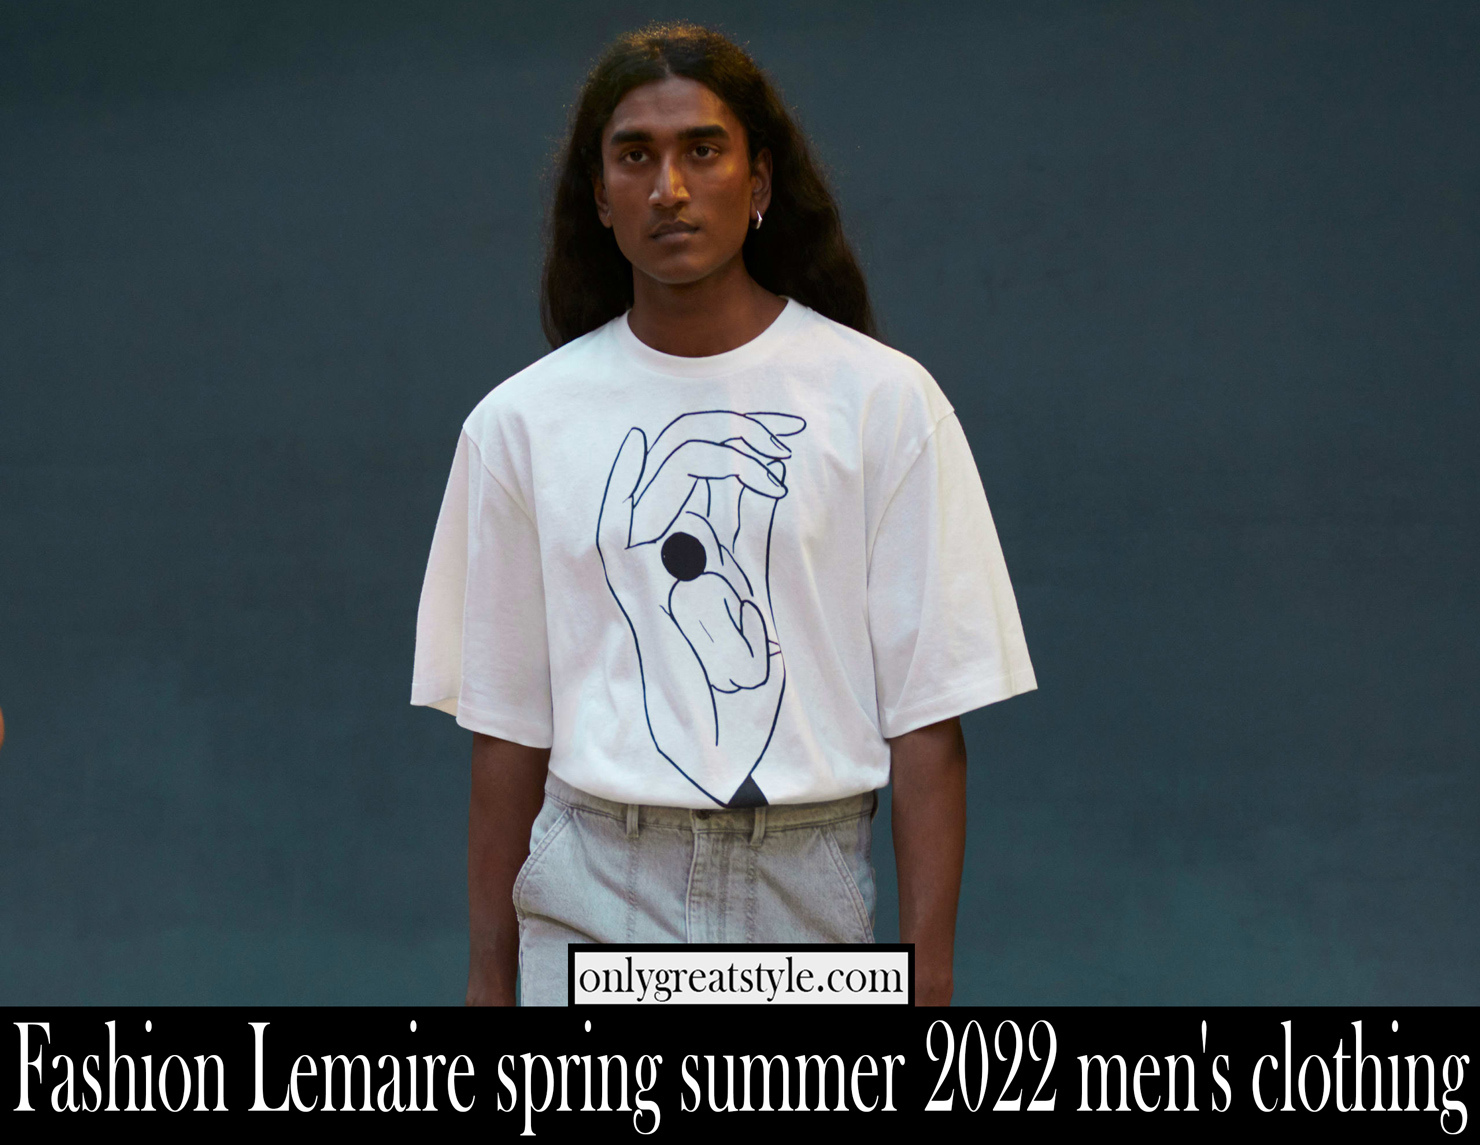 Fashion Lemaire spring summer 2022 mens clothing